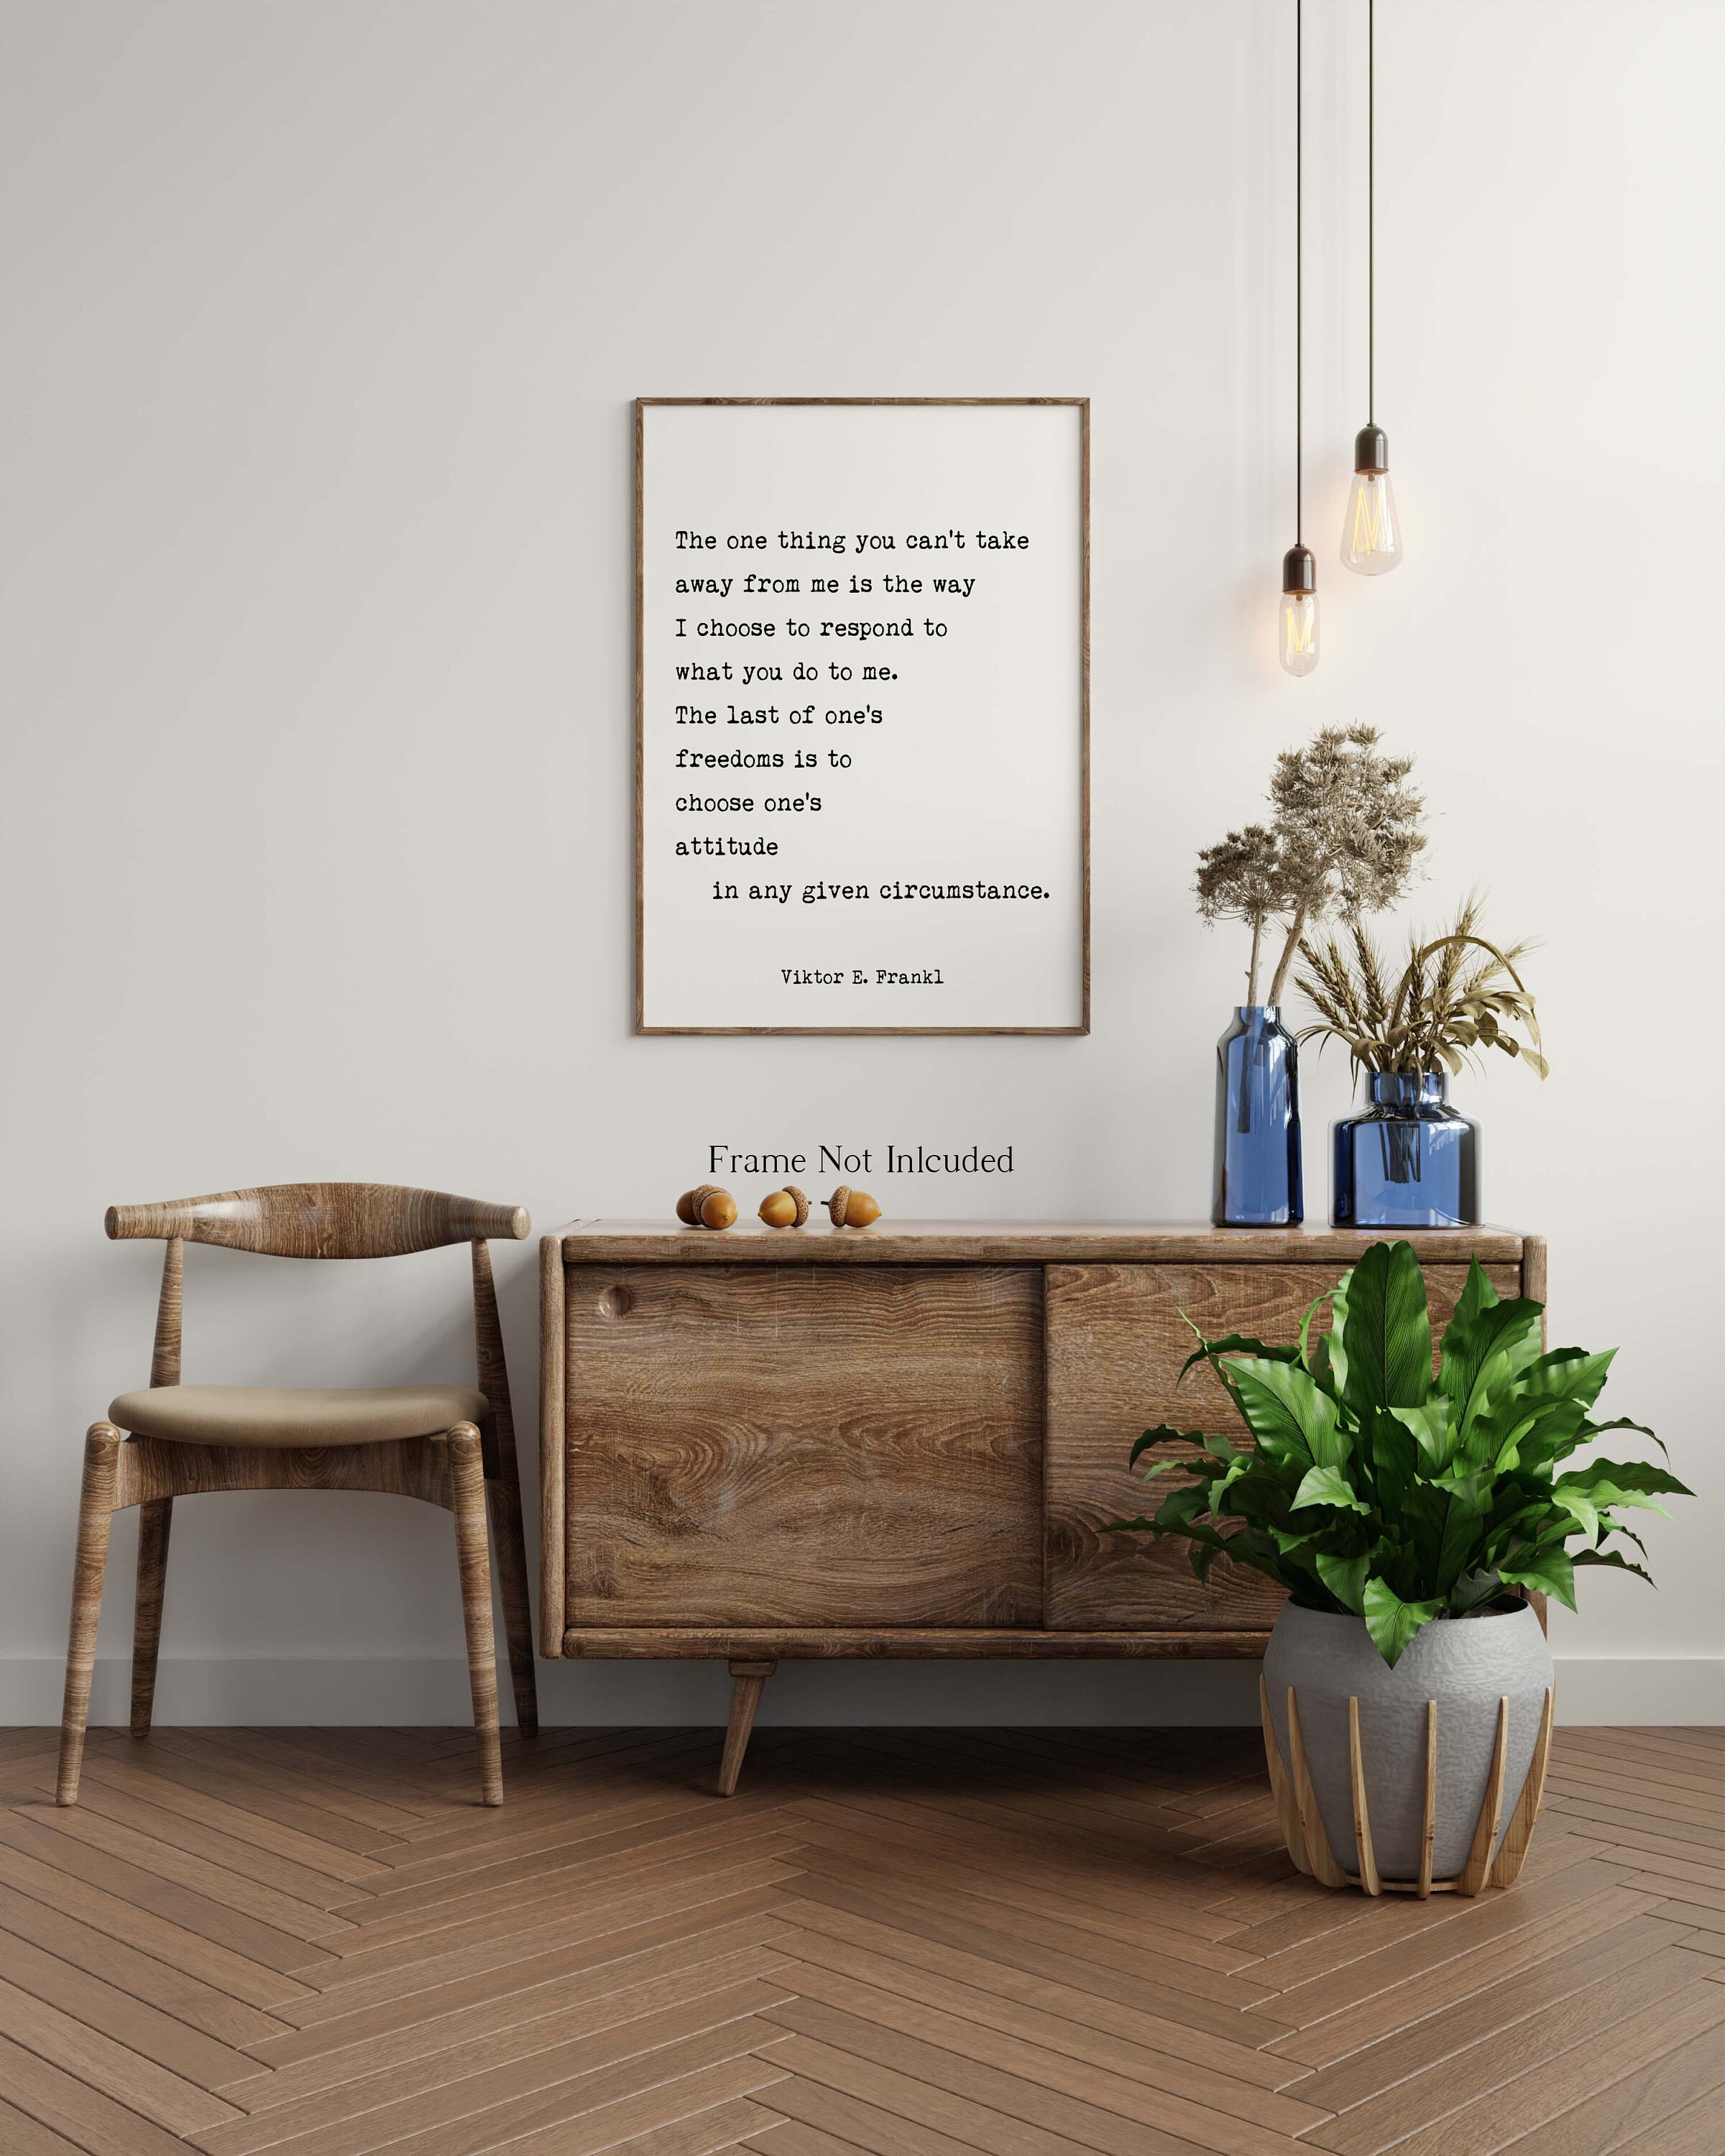 Viktor Frankl Quote. Man's Search for Meaning - Etsy UK